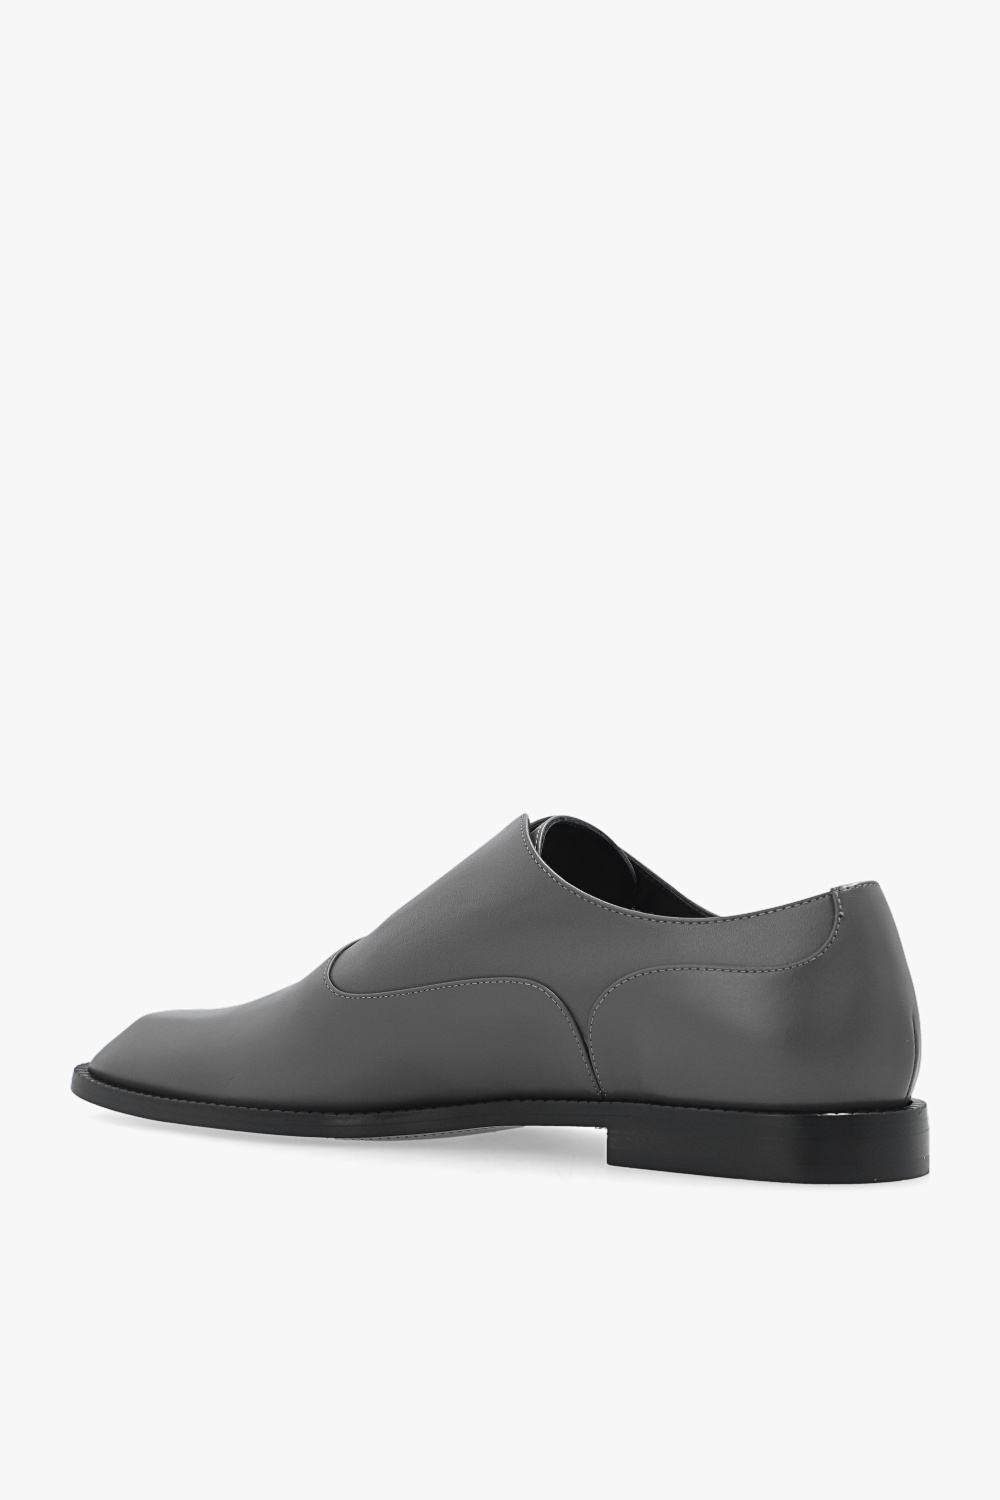 Victoria Beckham Leather shoes